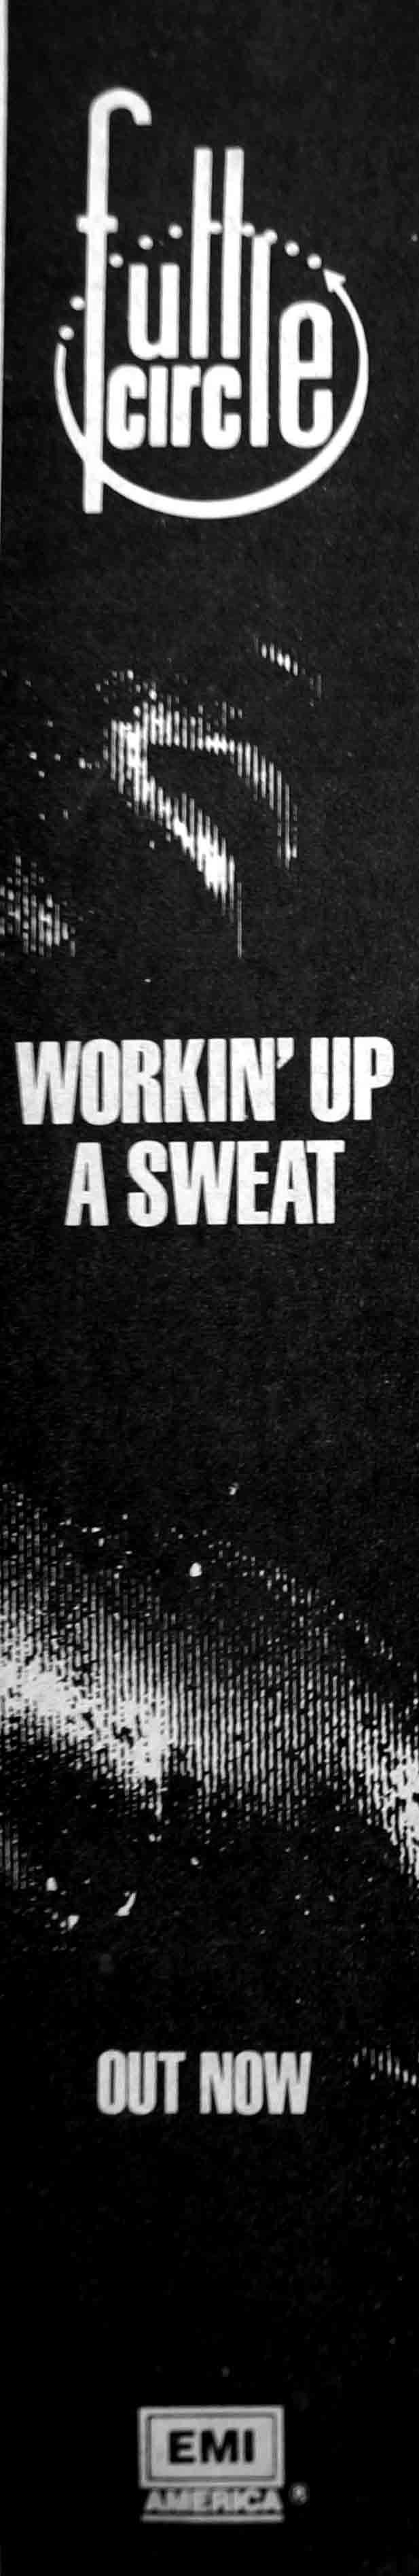 full-circle-working-up-a-sweat